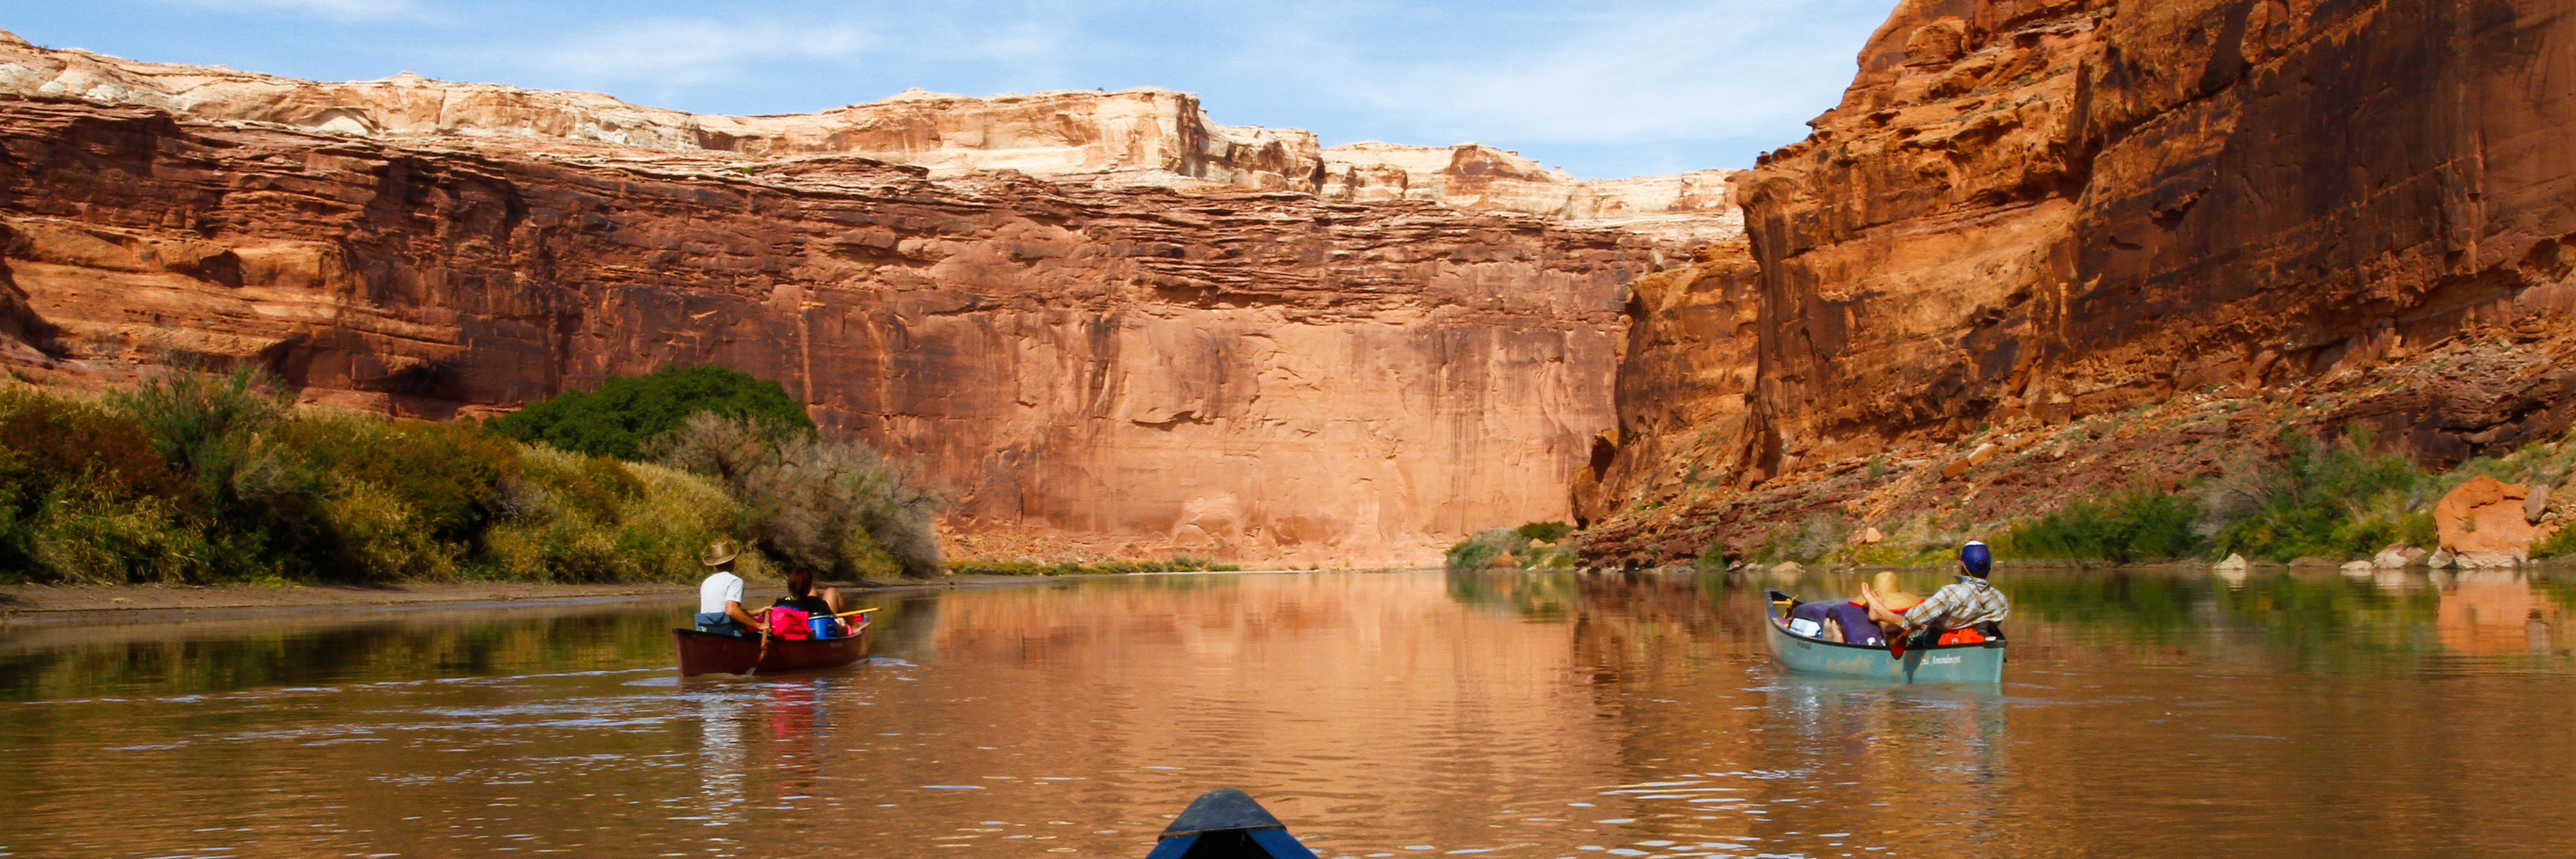 Two canoes full of people float through a red-rock canyon